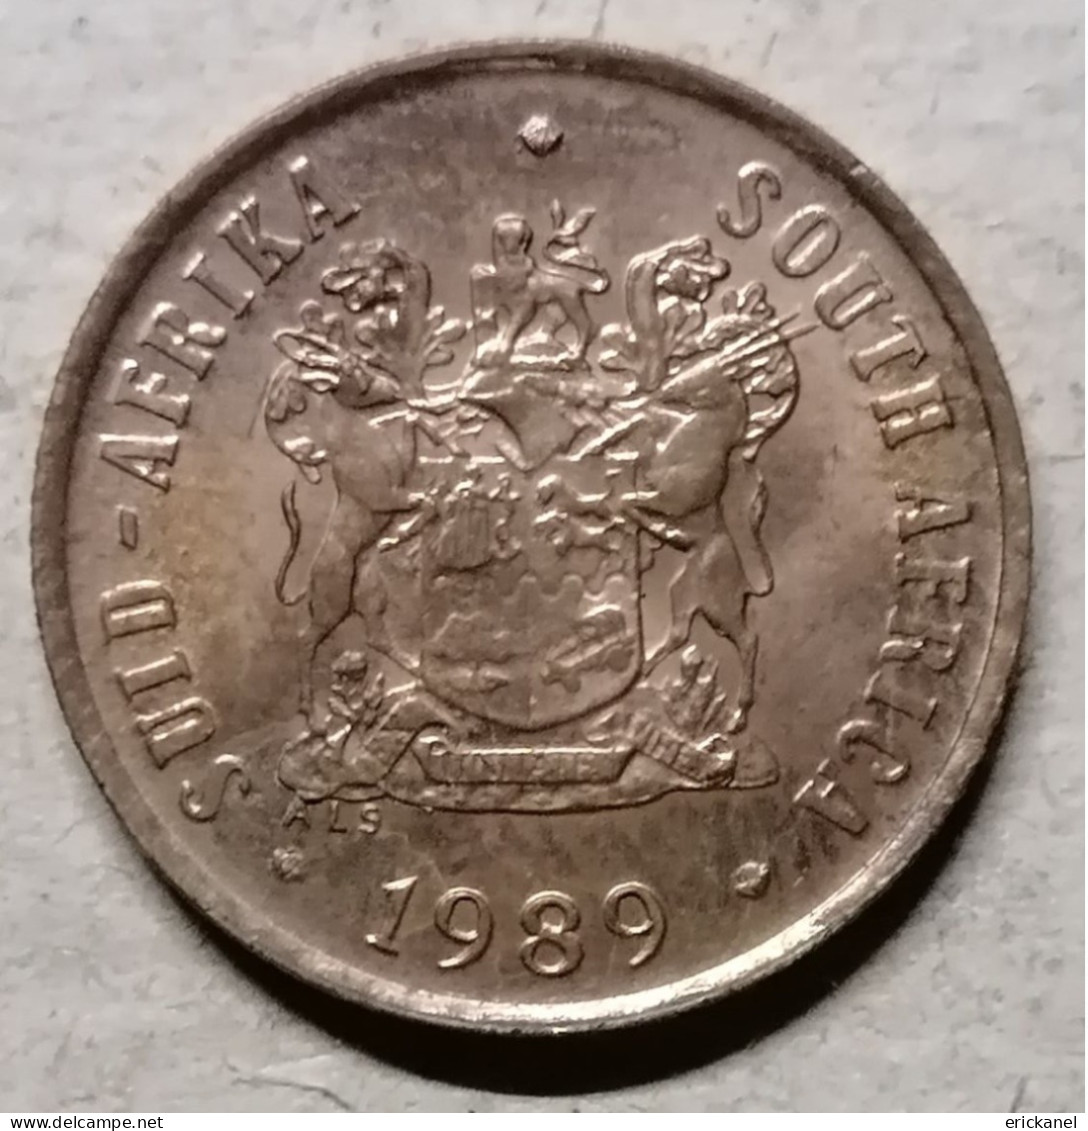 SOUTH AFRICA 1989 1 CENT - South Africa